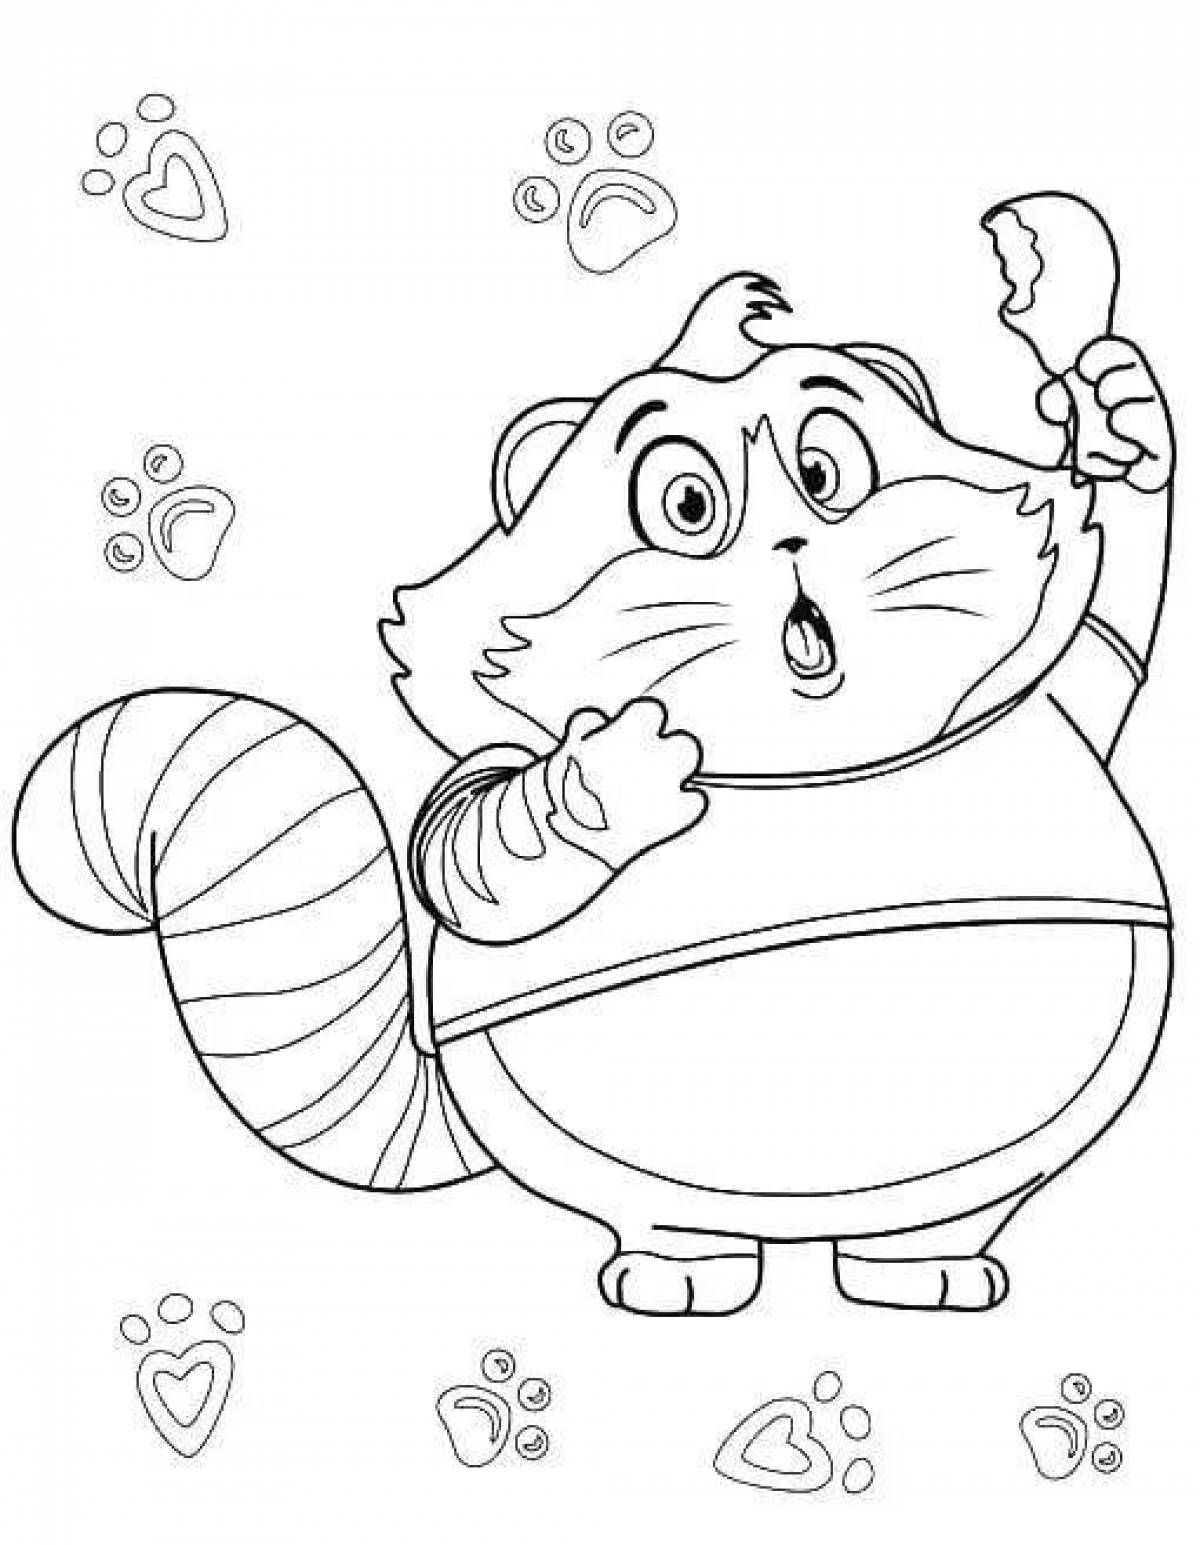 Fabulous cat donut coloring page